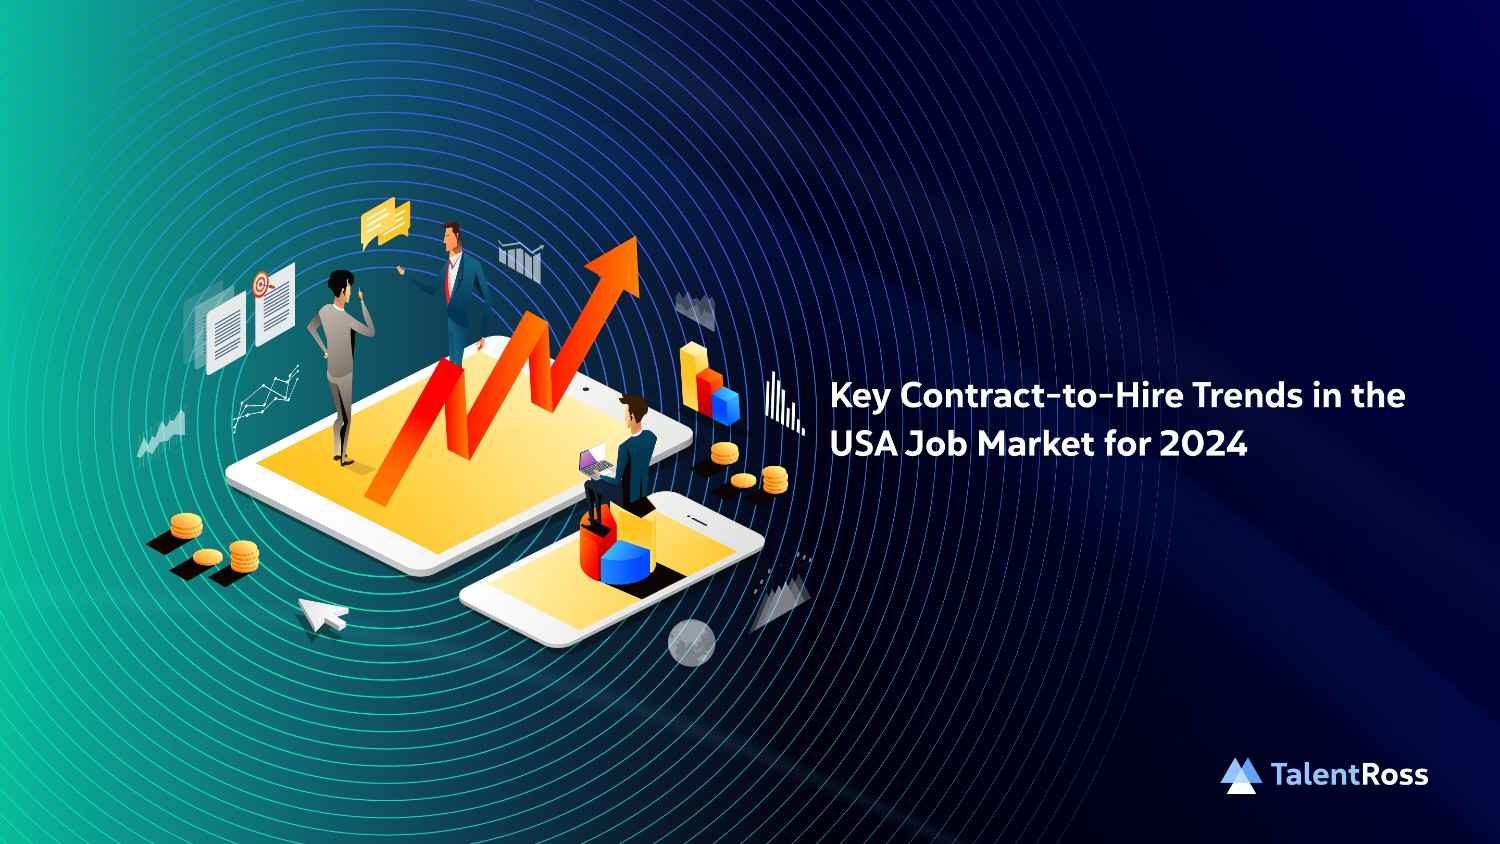 Key Contract-to-Hire Trends in the USA Job Market for 2024